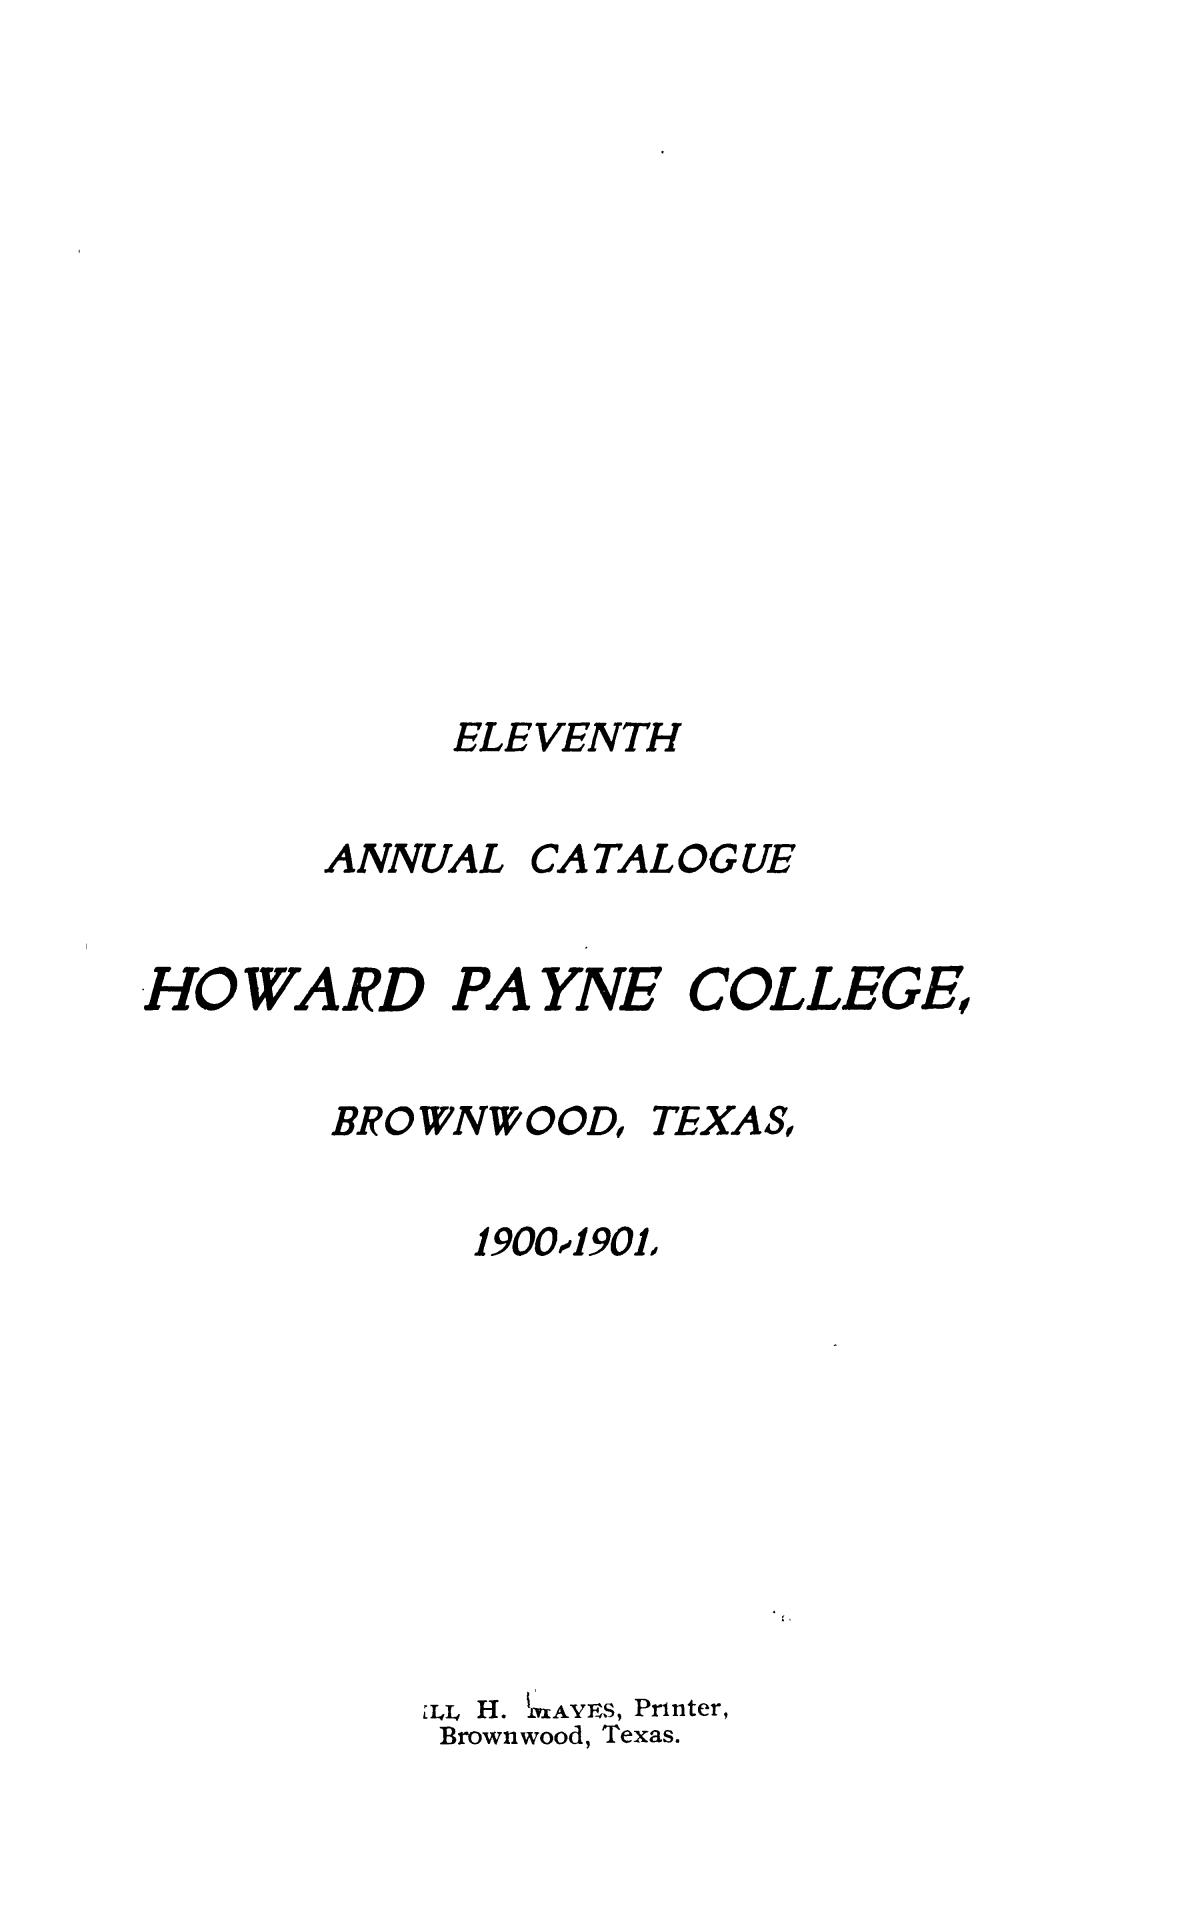 Catalogue of Howard Payne College, 1900-1901
                                                
                                                    1
                                                